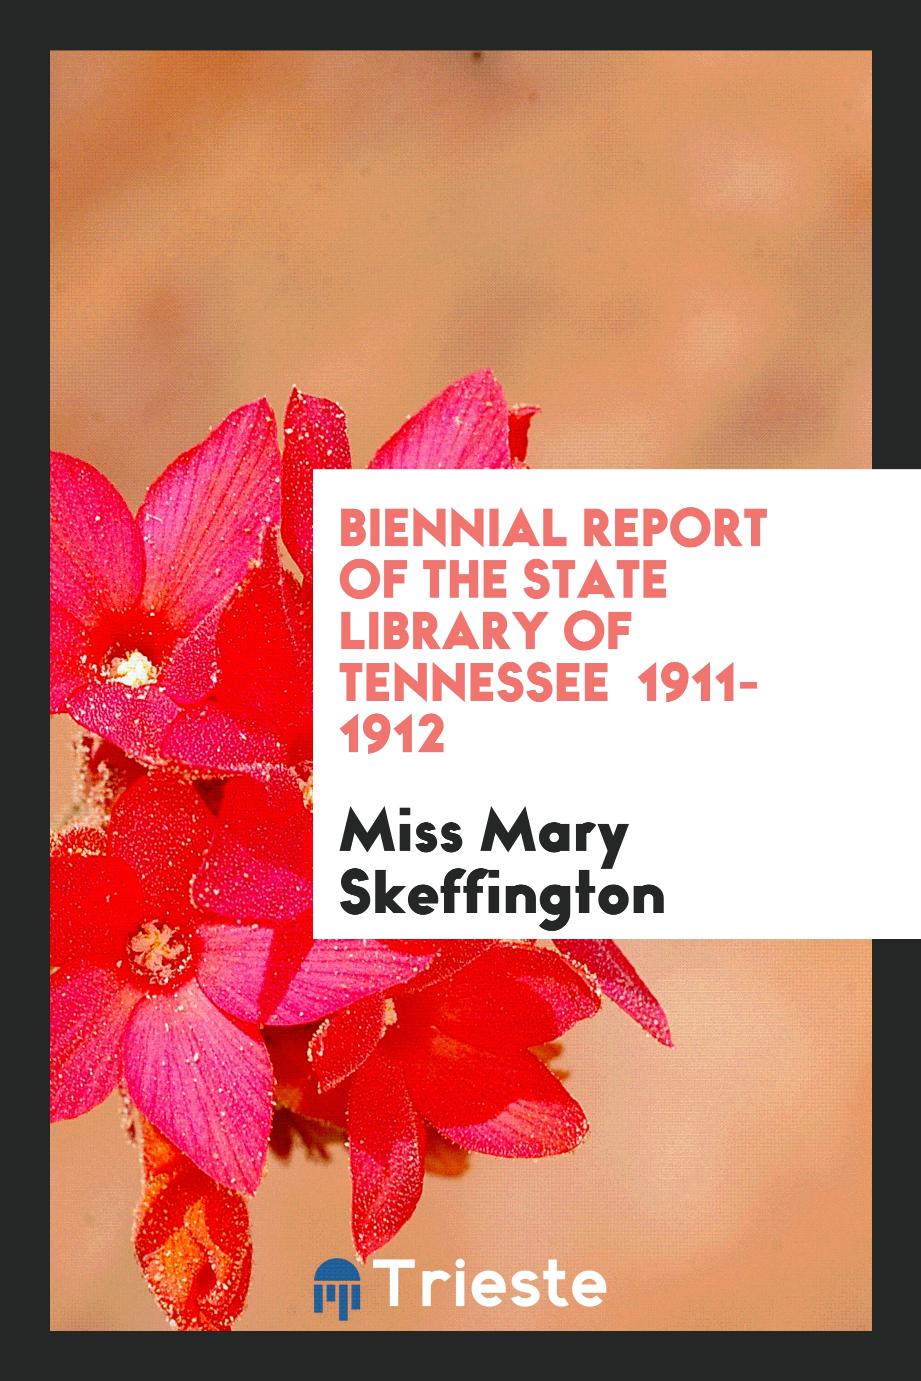 Biennial Report of the State Library of Tennessee 1911-1912